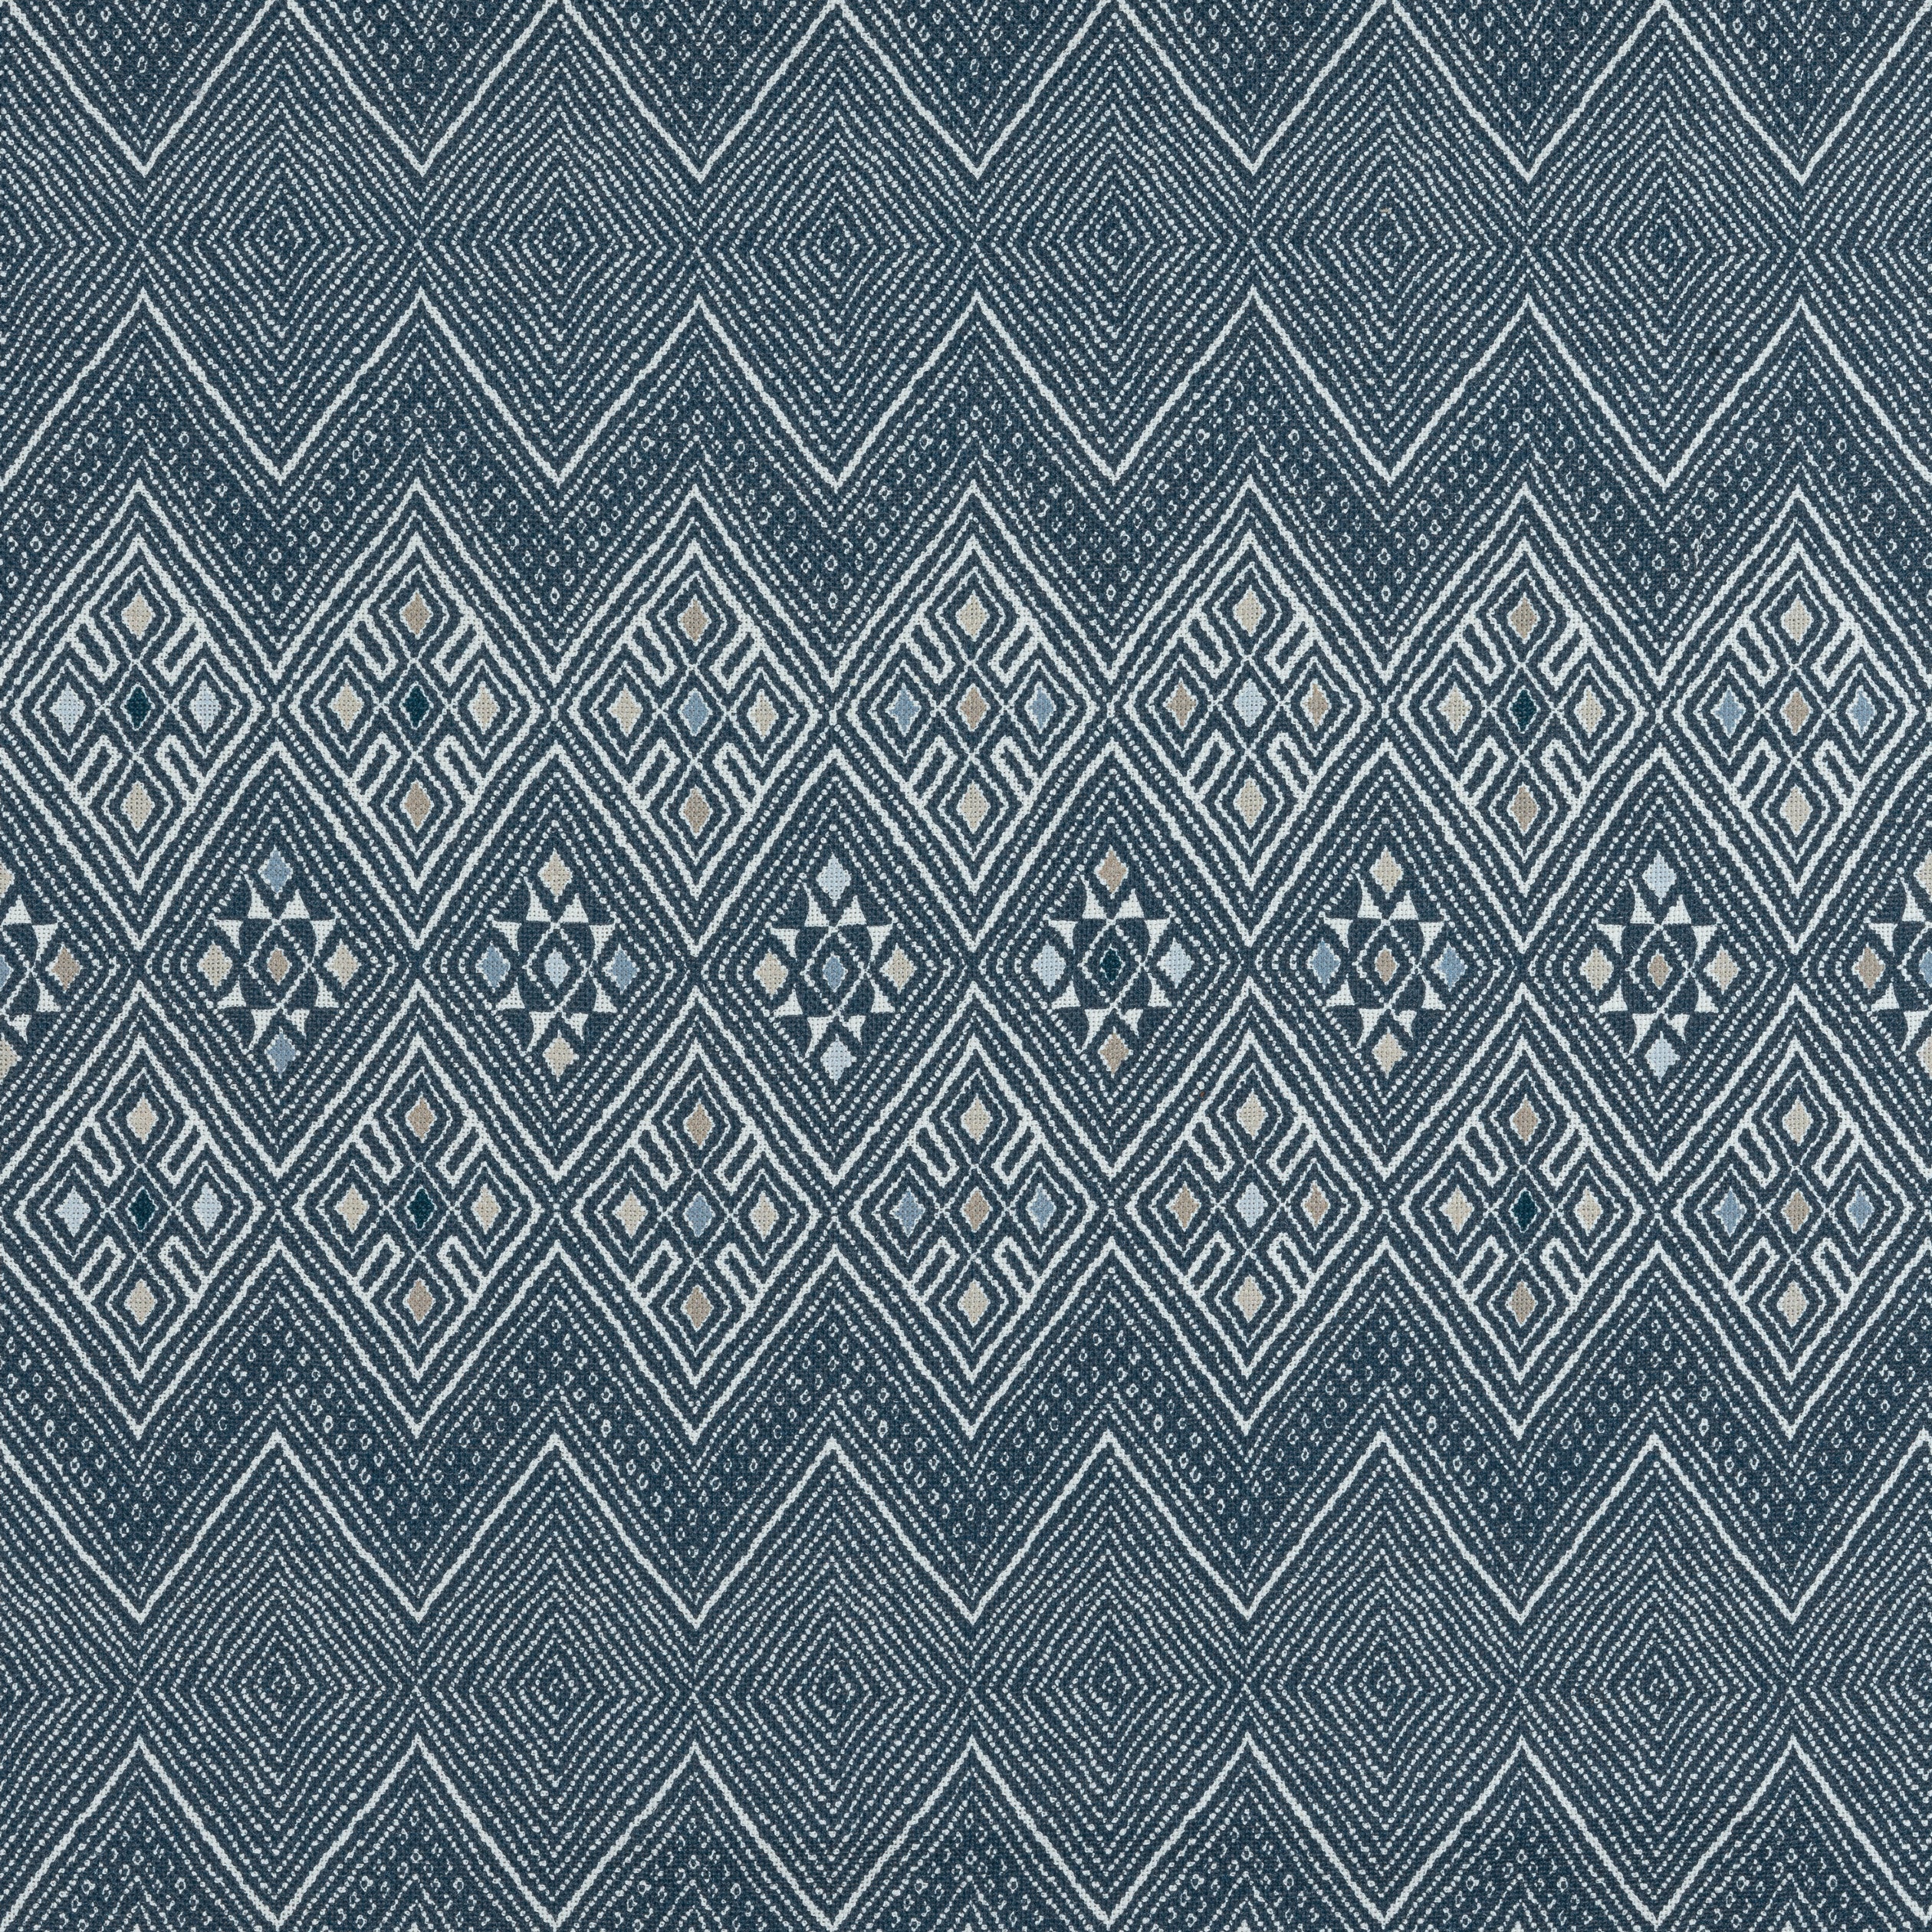 High Plains fabric in navy and white color - pattern number F913231 - by Thibaut in the Mesa collection